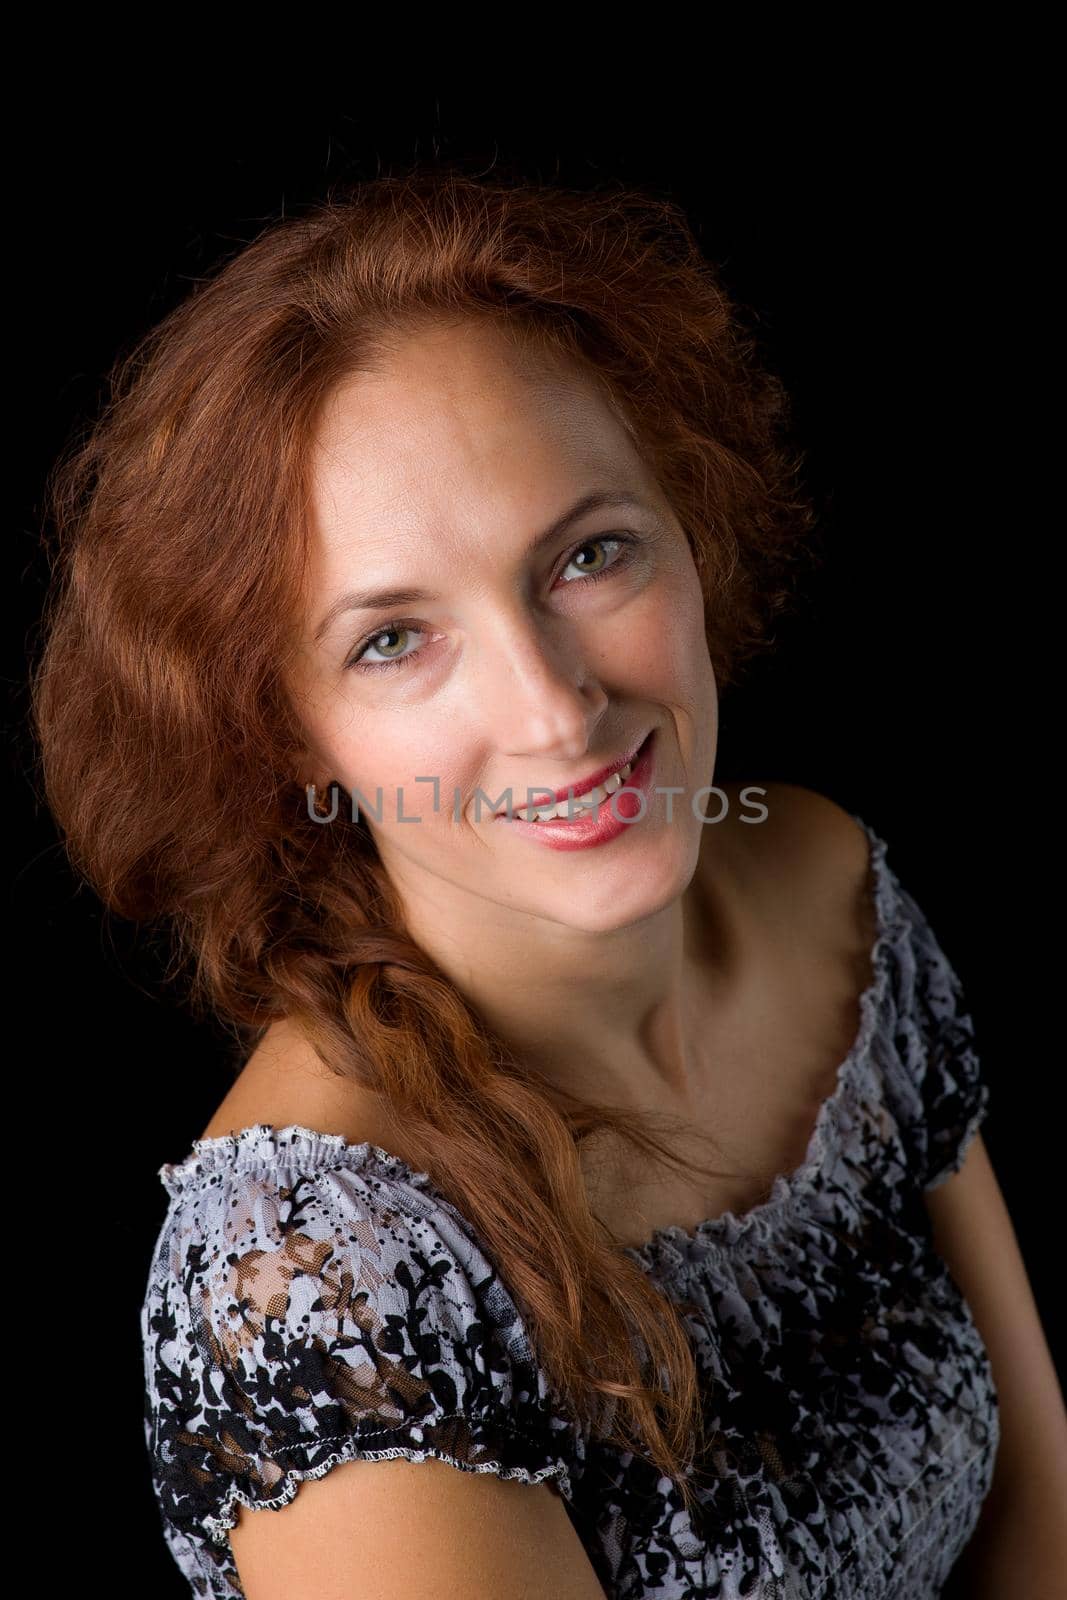 Close up portrait of beautiful woman. Happy young woman in sundress posing against black background. Portrait of smiling girl looking at camera